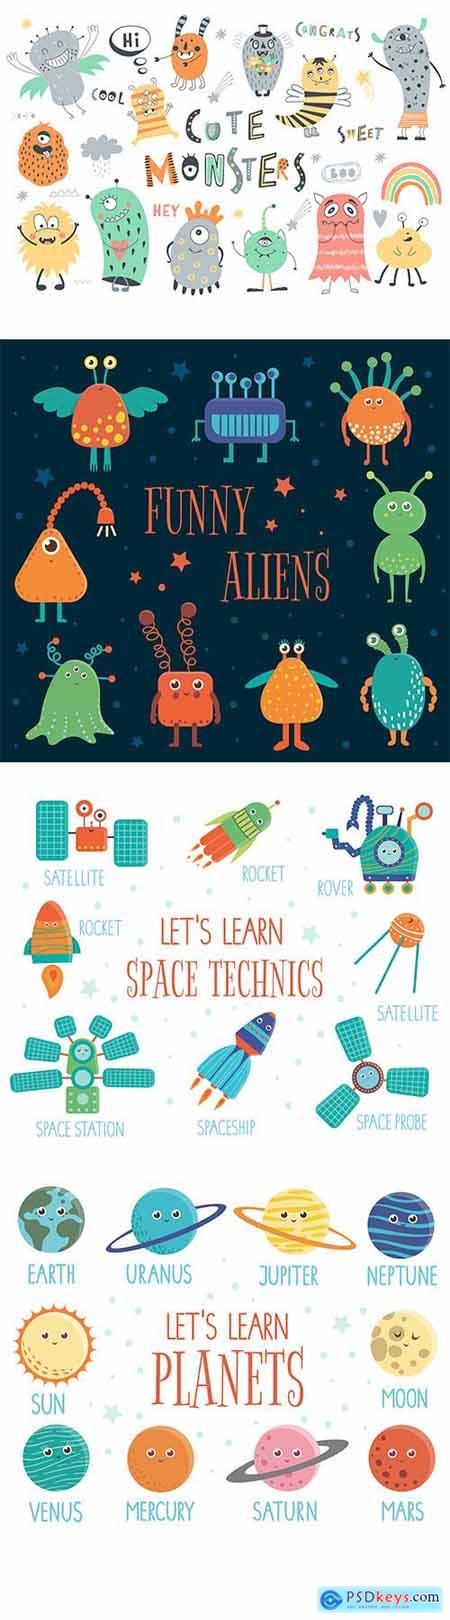 Funny Aliens Cute Monsters, Space Technics and Planets